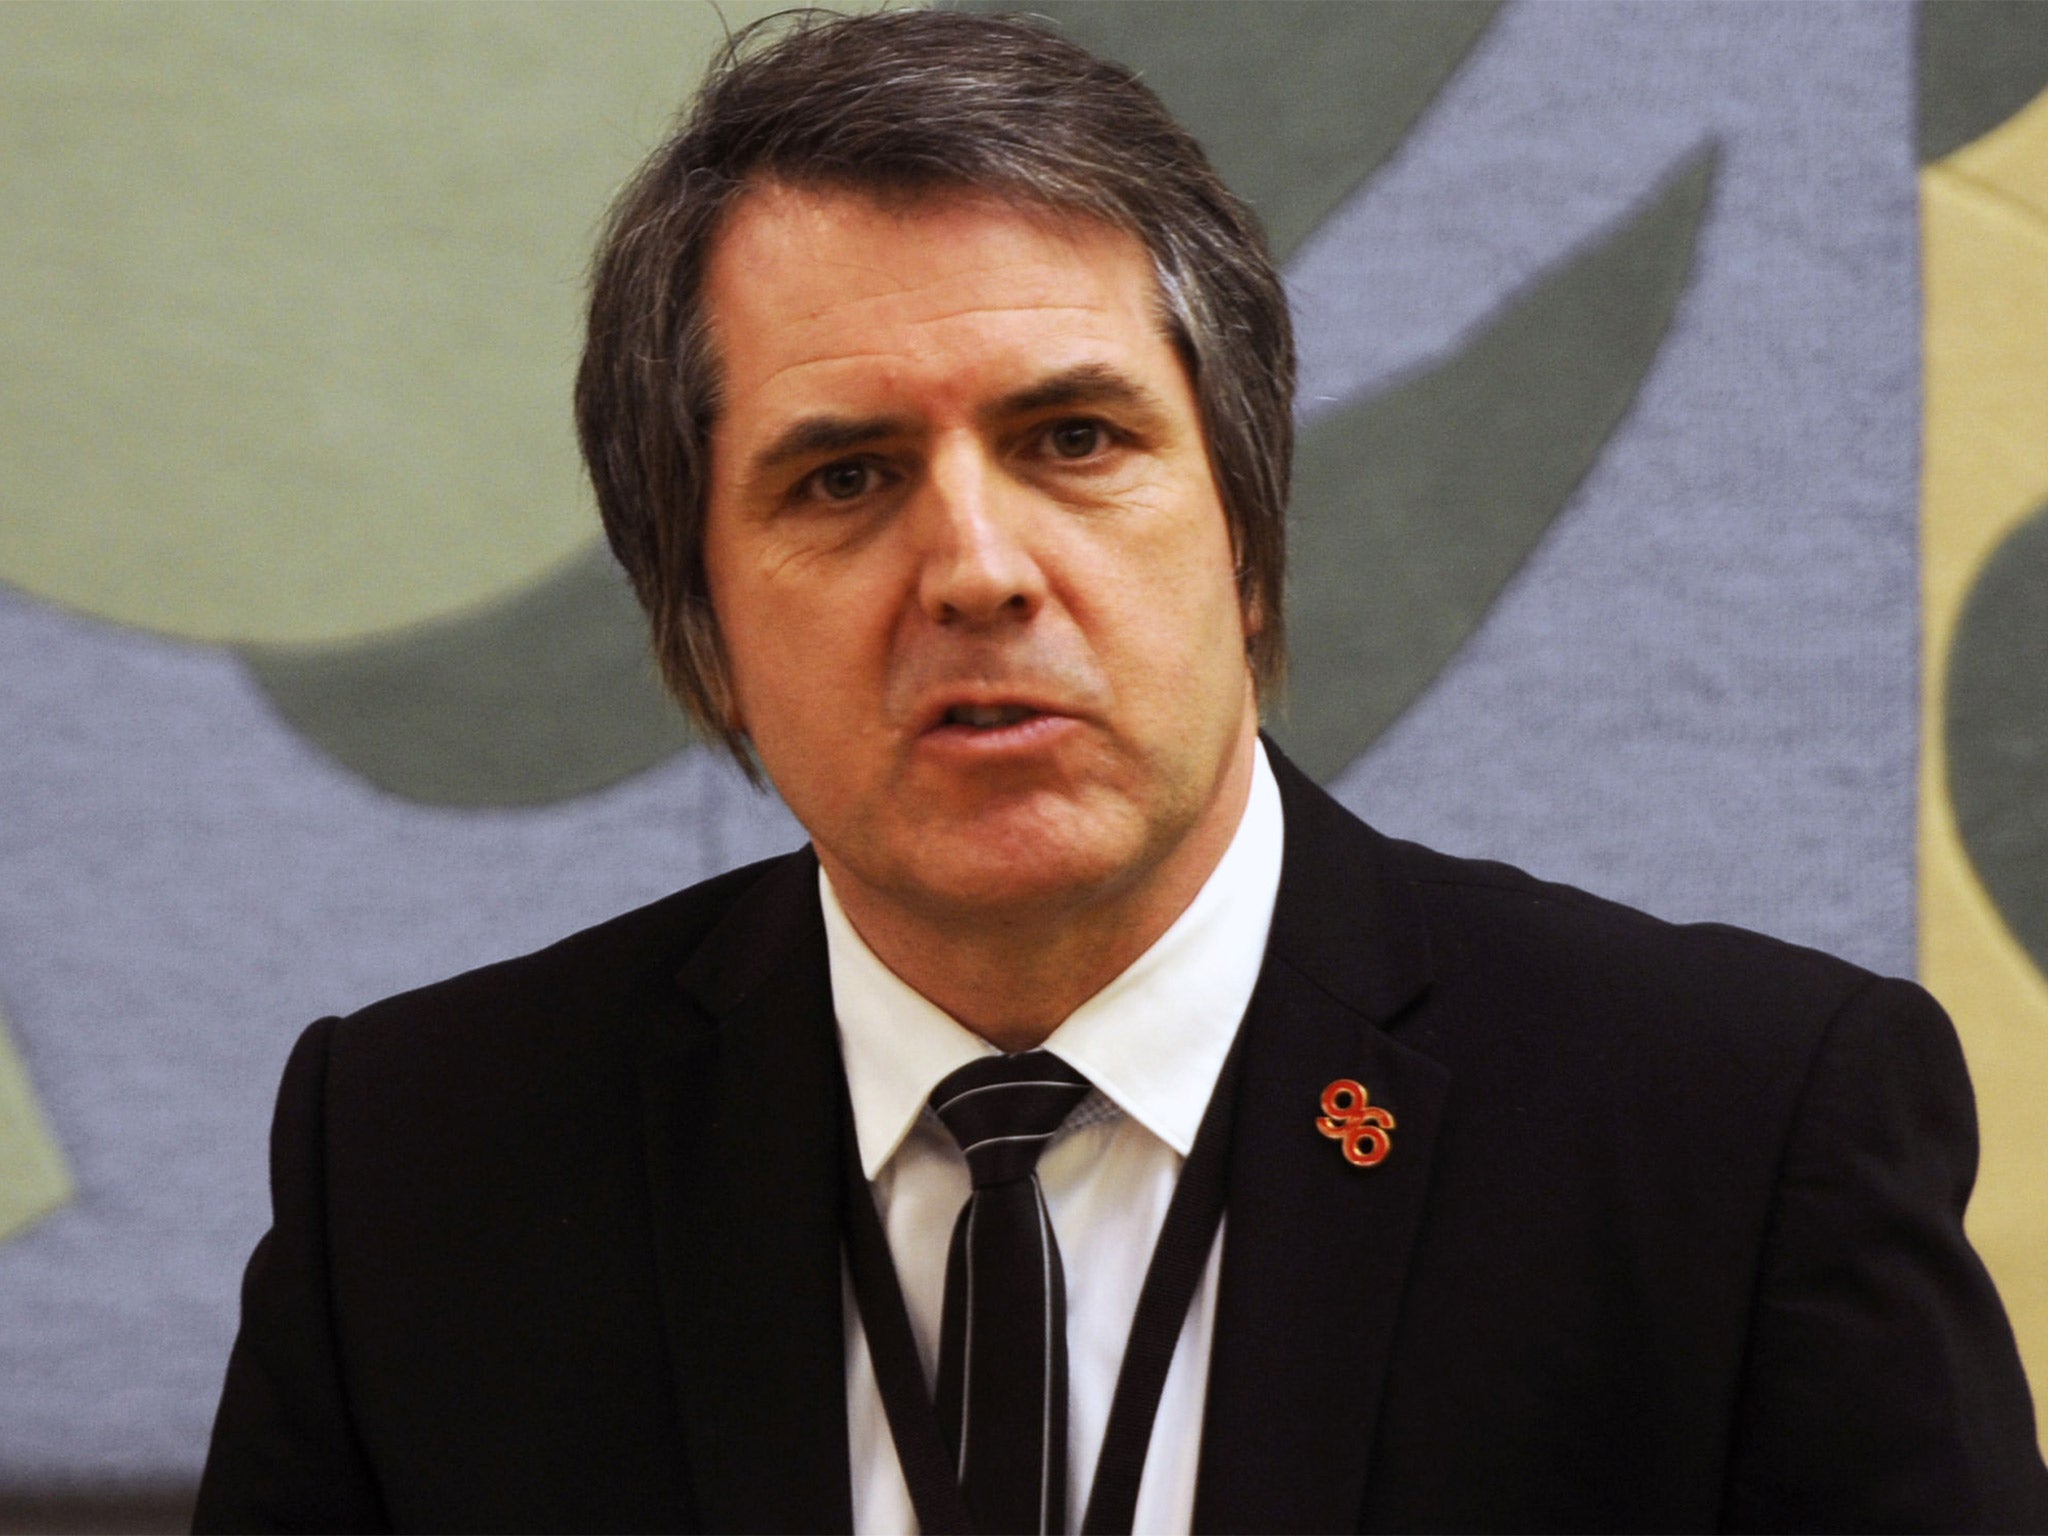 Steve Rotheram has been ejected from Labour's National Executive Committee